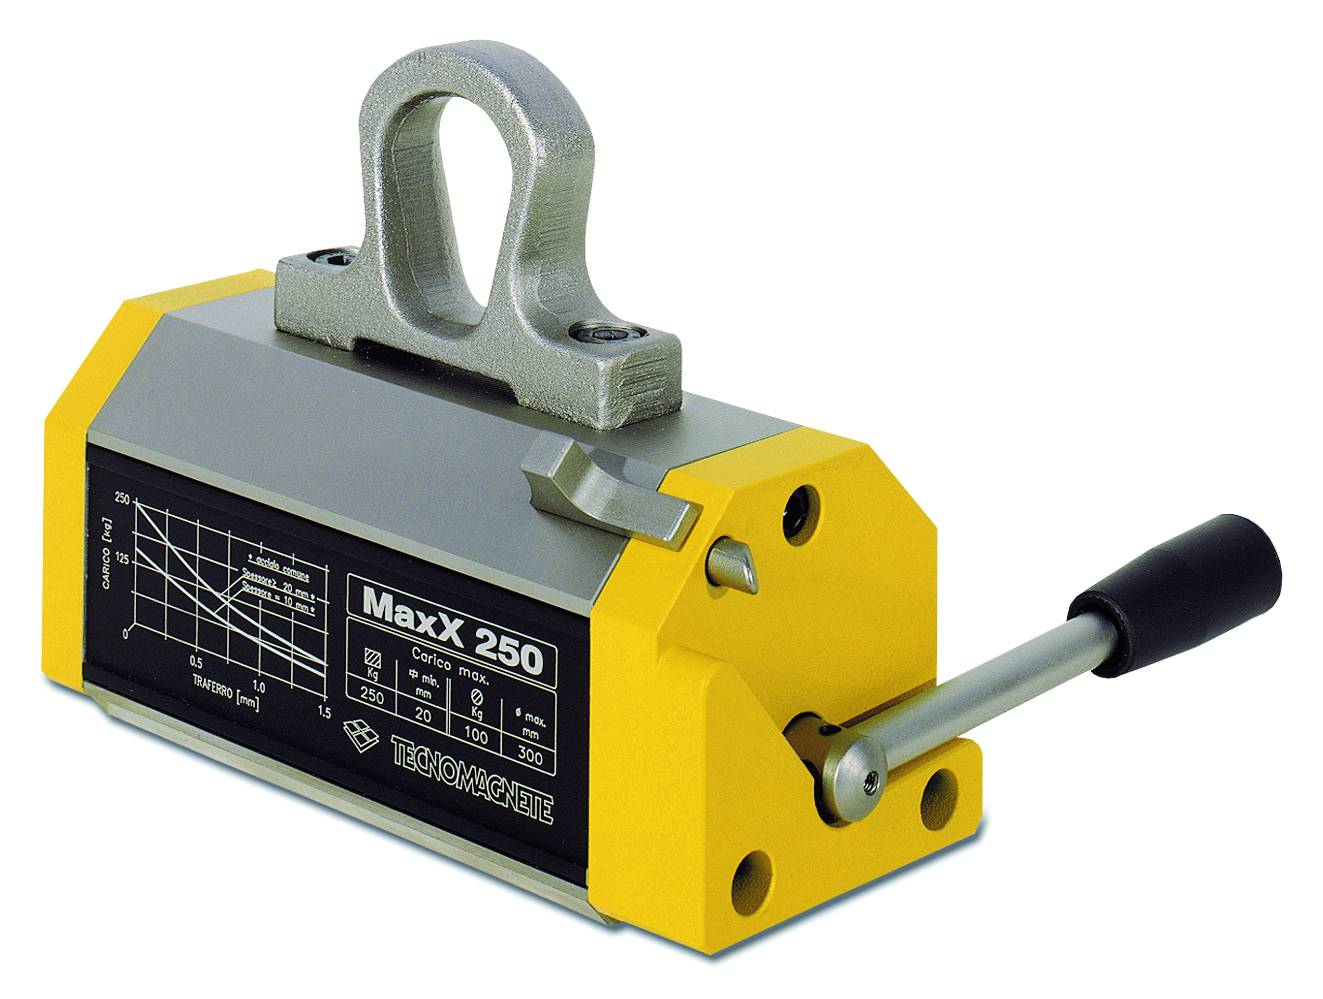 Permanent magnetic lifting devices